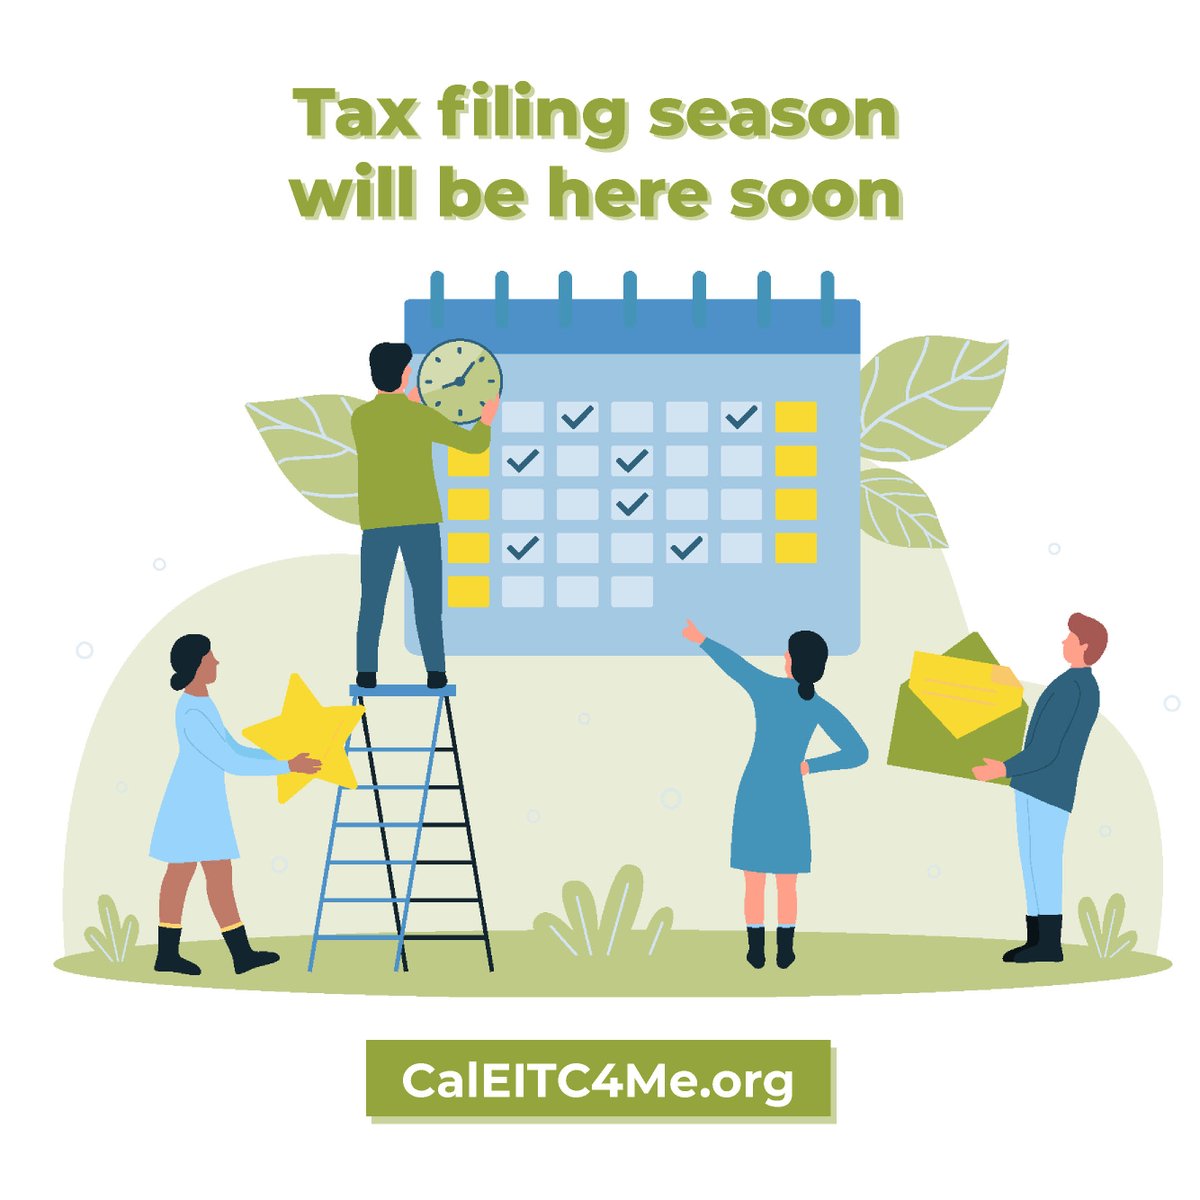 The 2023 tax filing season will be here soon. Give yourself the gift of peace of mind and a tax credit, and make a plan to file your federal income tax return today. 📝

#CalEITC4Me #Assuaged #Californiansfinancialassistance #students #studentinterns #taxcredit #Californiatax